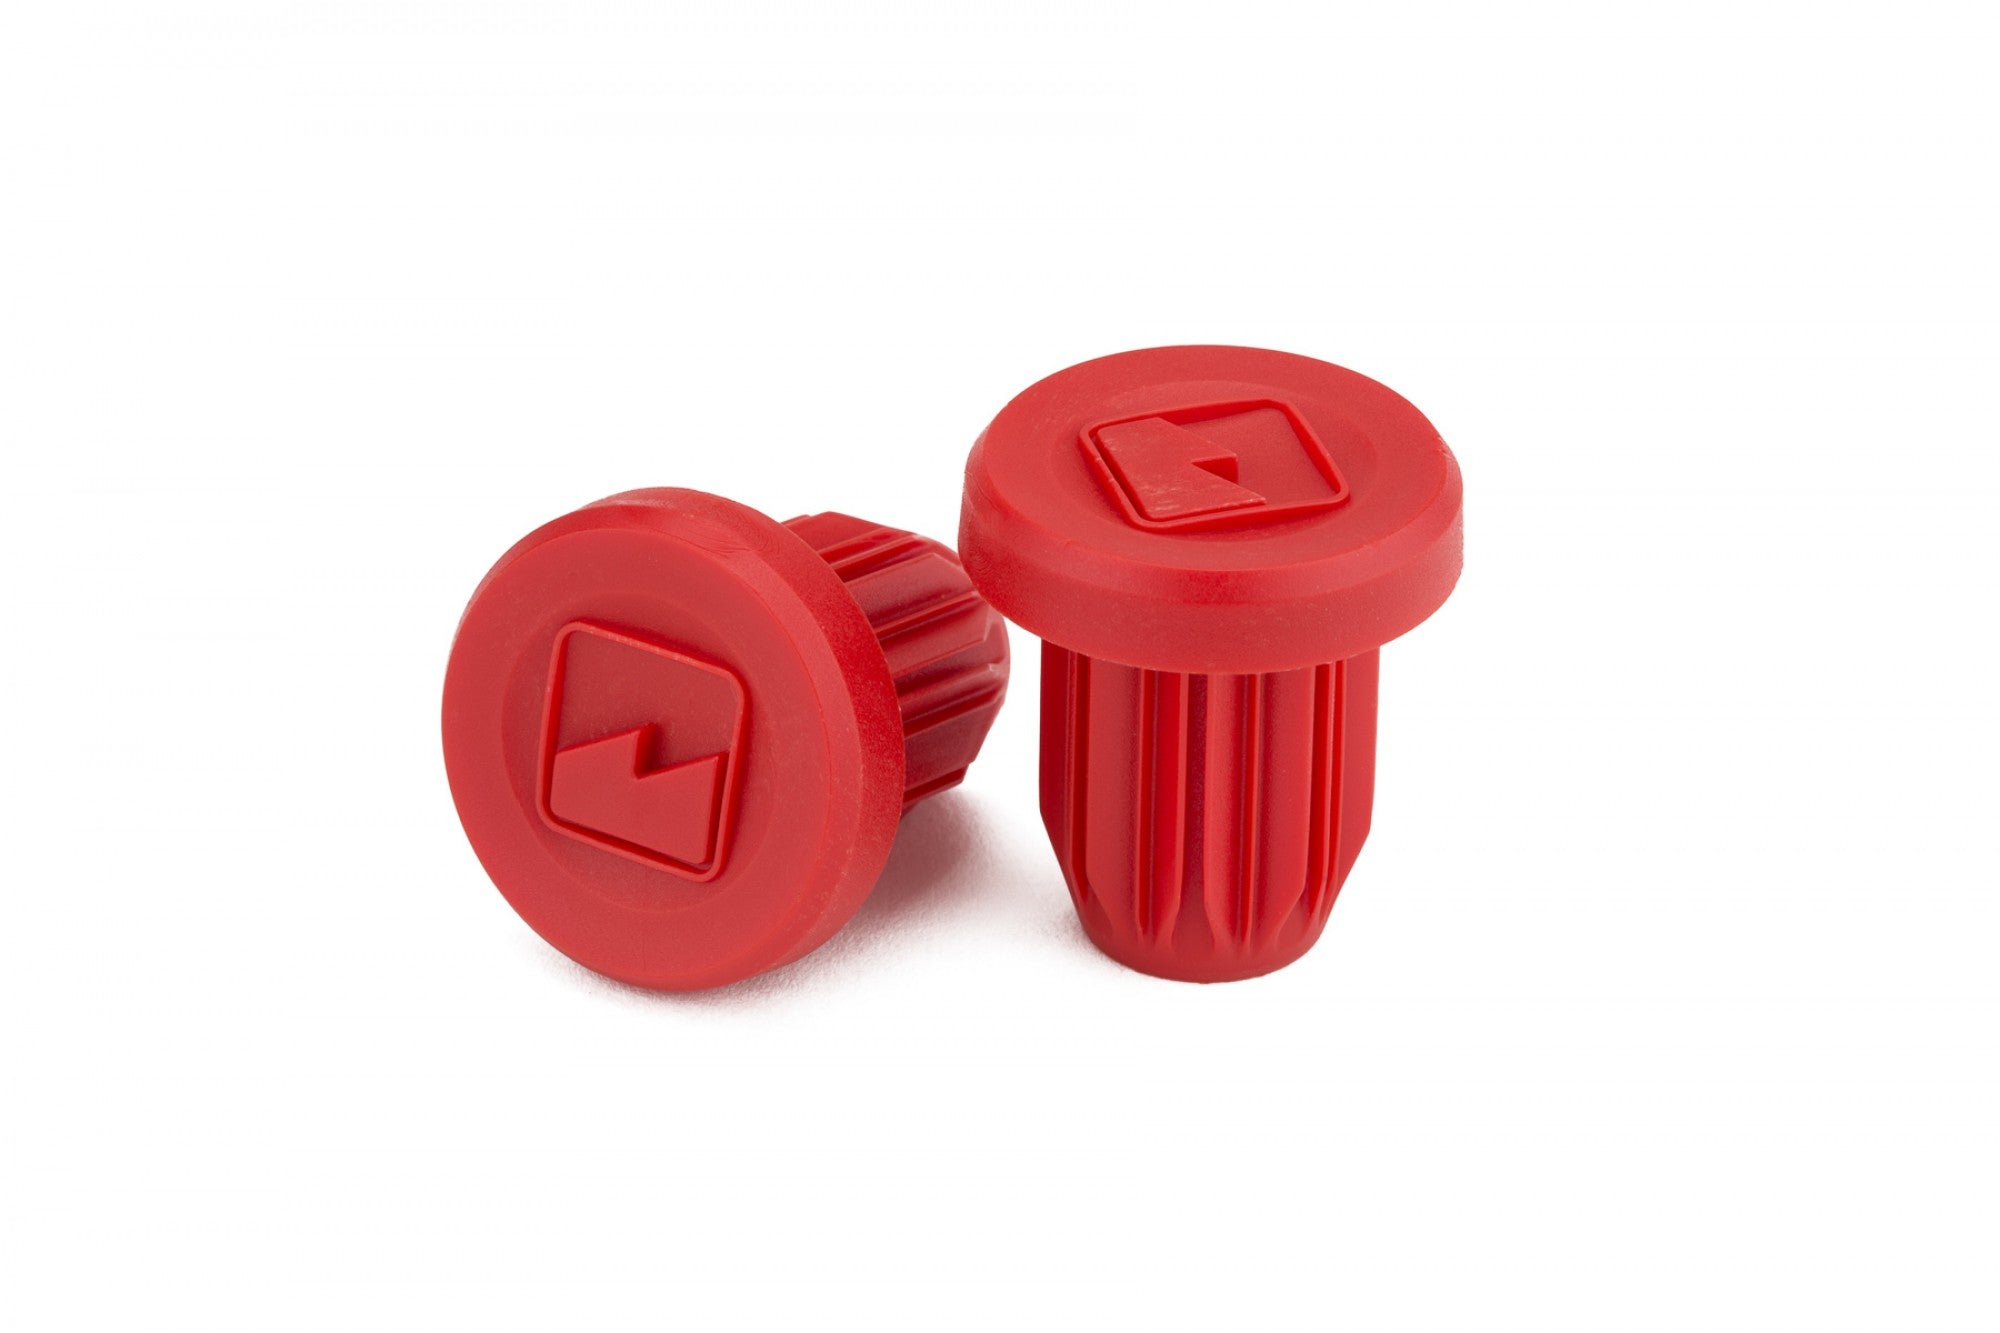 Merritt Insert Bar Ends (Various Colors) - Downtown Bicycle Works 